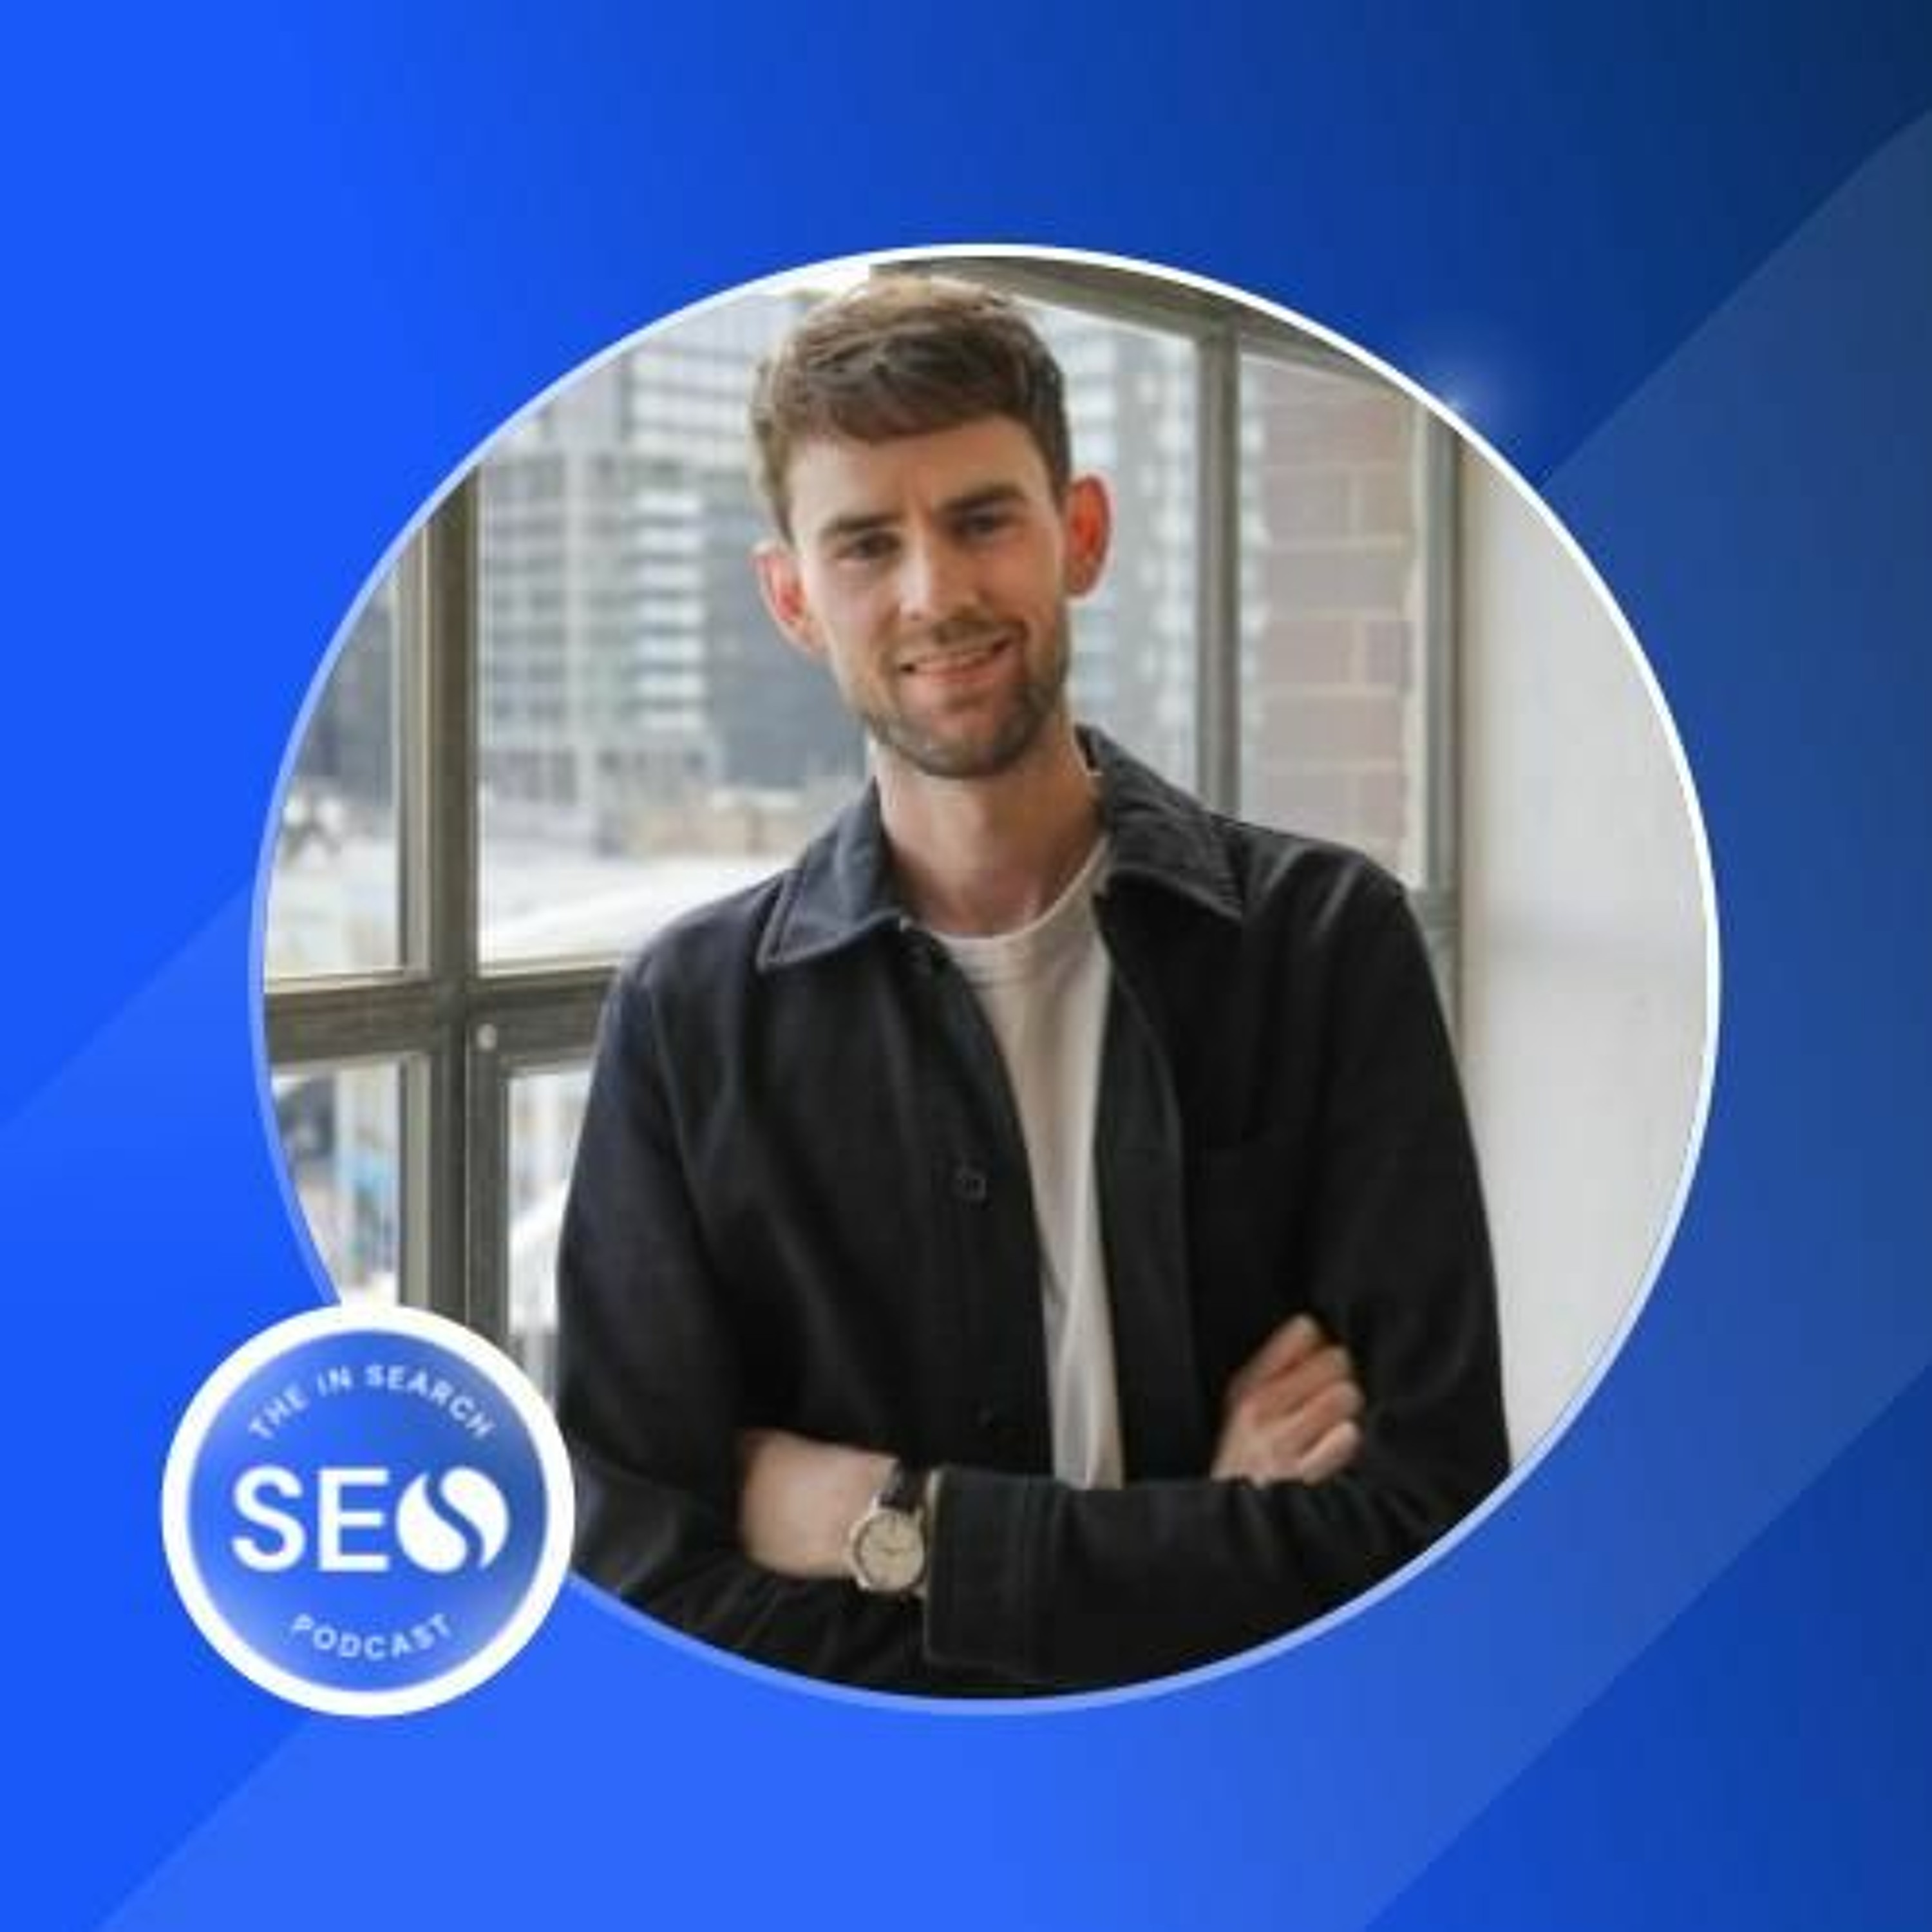 9 steps to scaling your enterprise content impact - with Jared Keleher